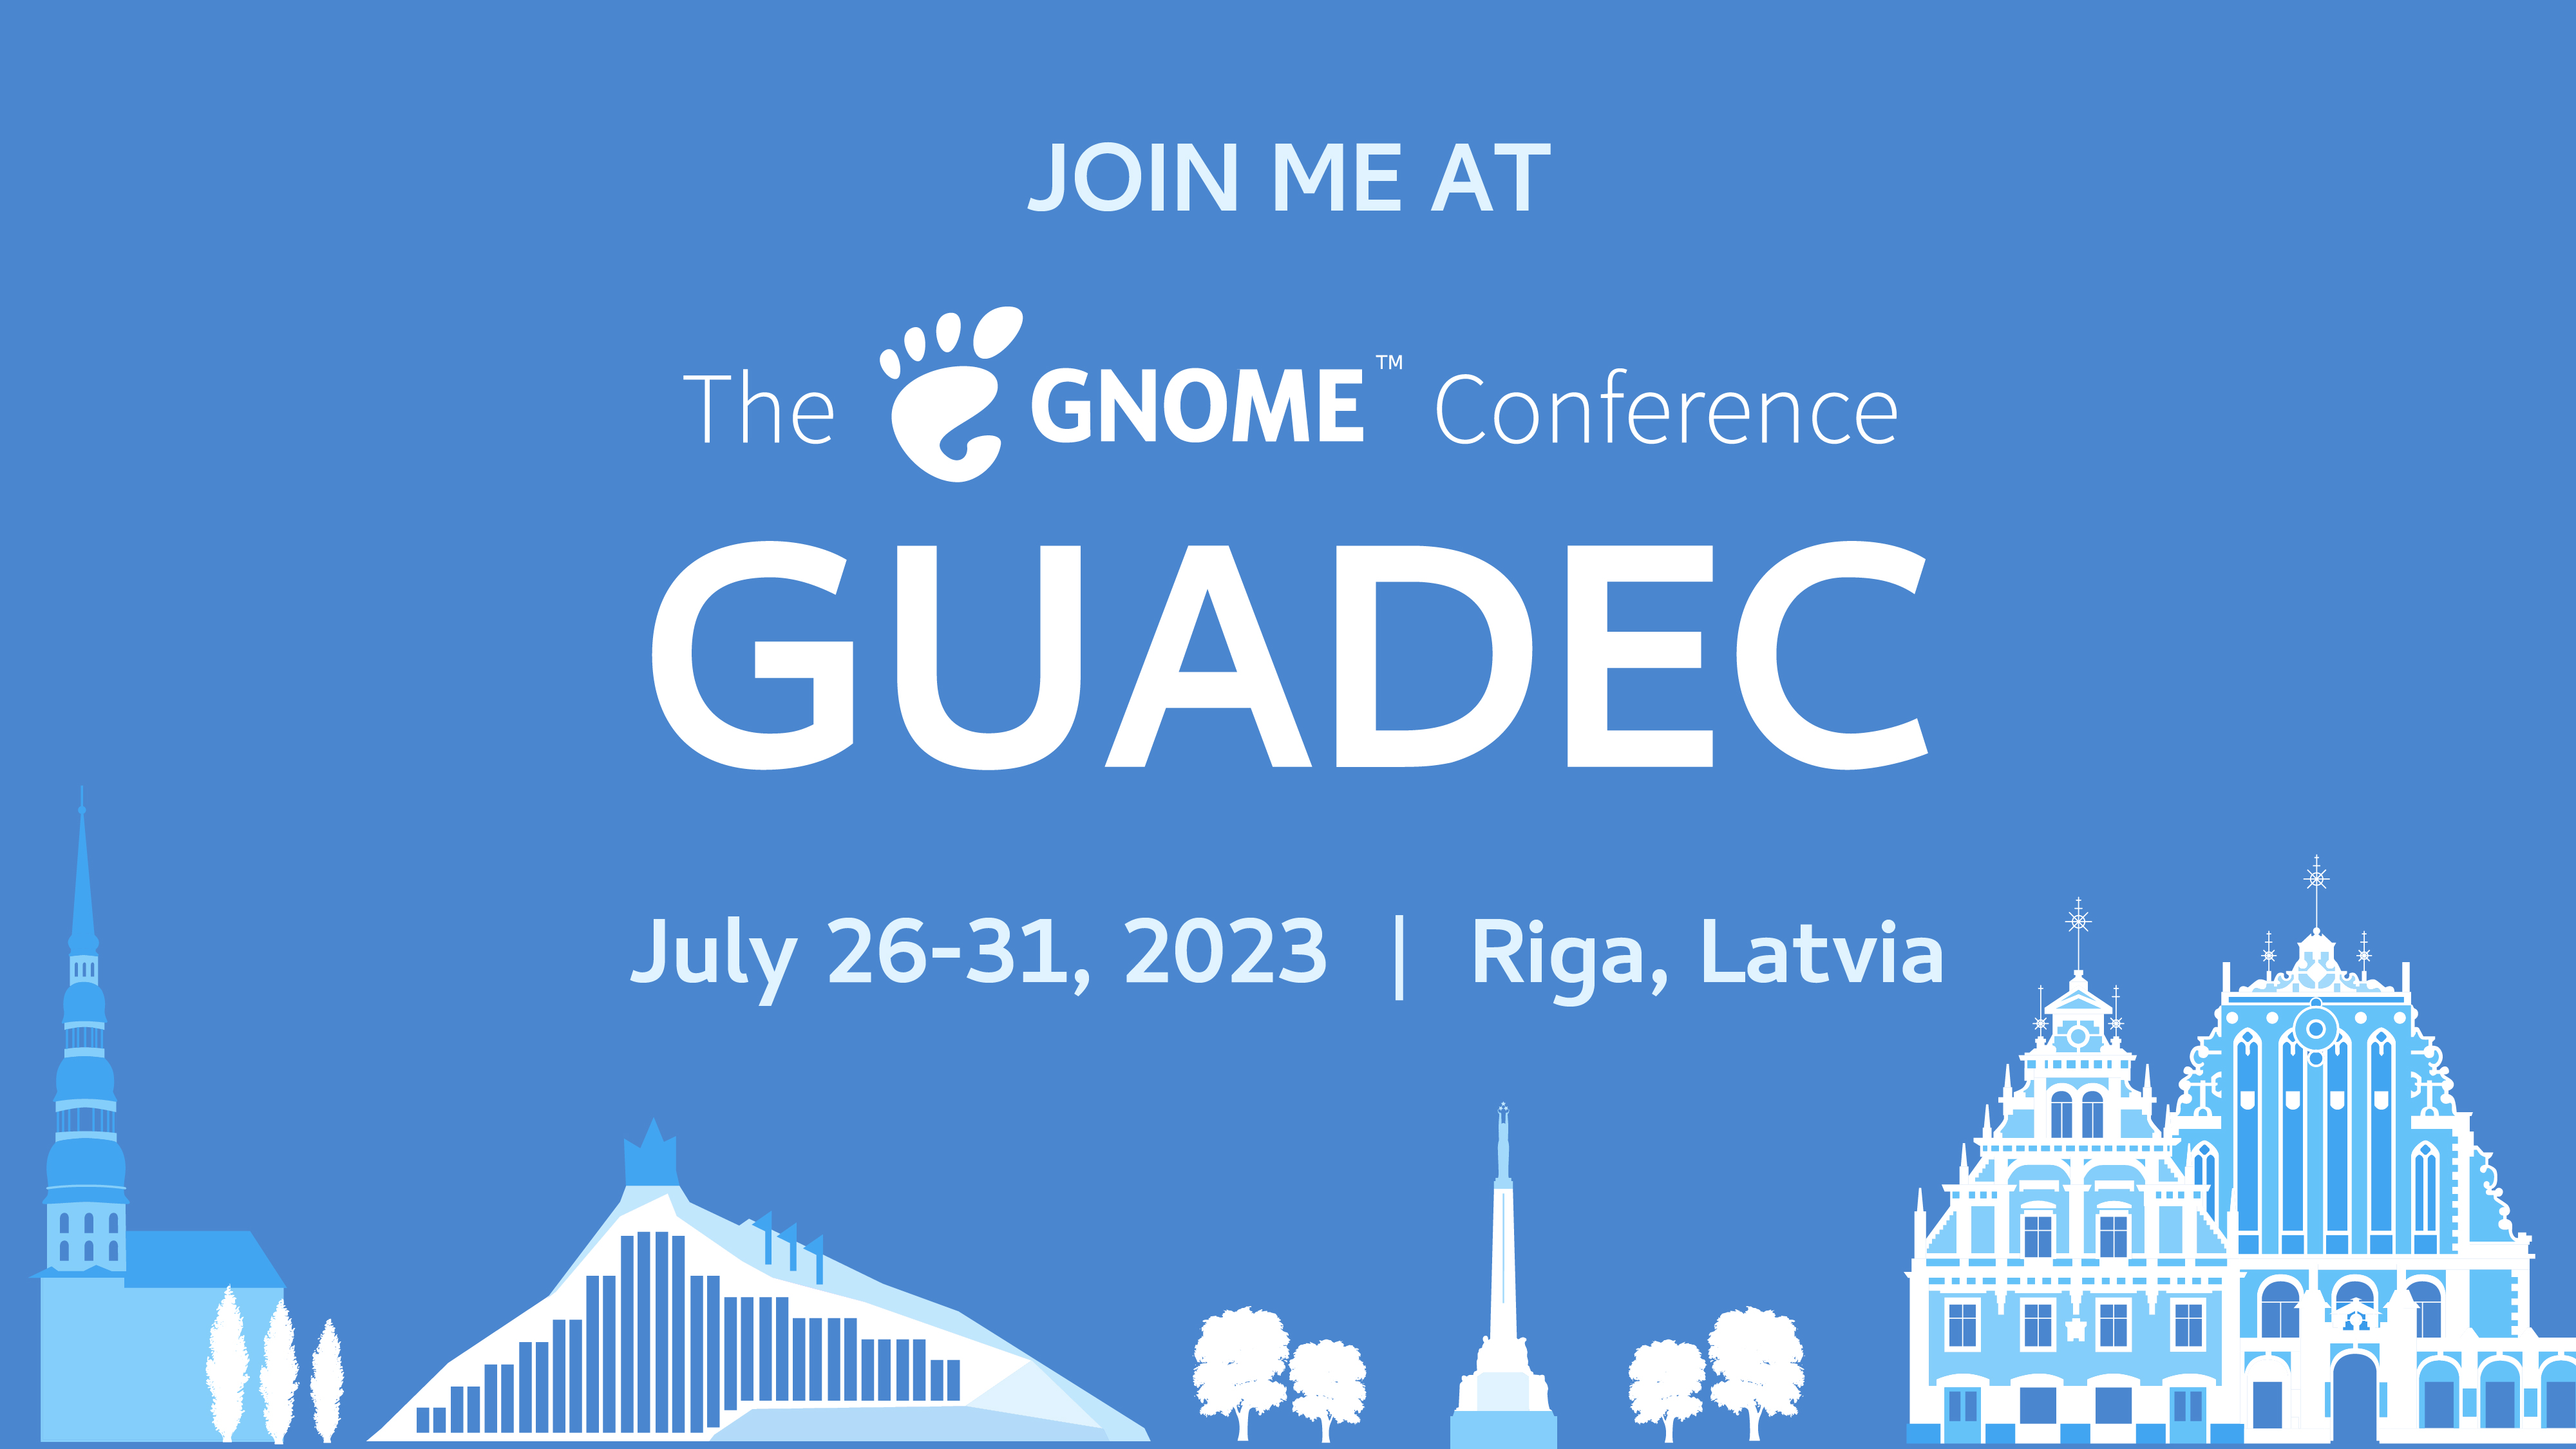 Join me at GUADEC July 26-31, 2023 in Riga, Latvia